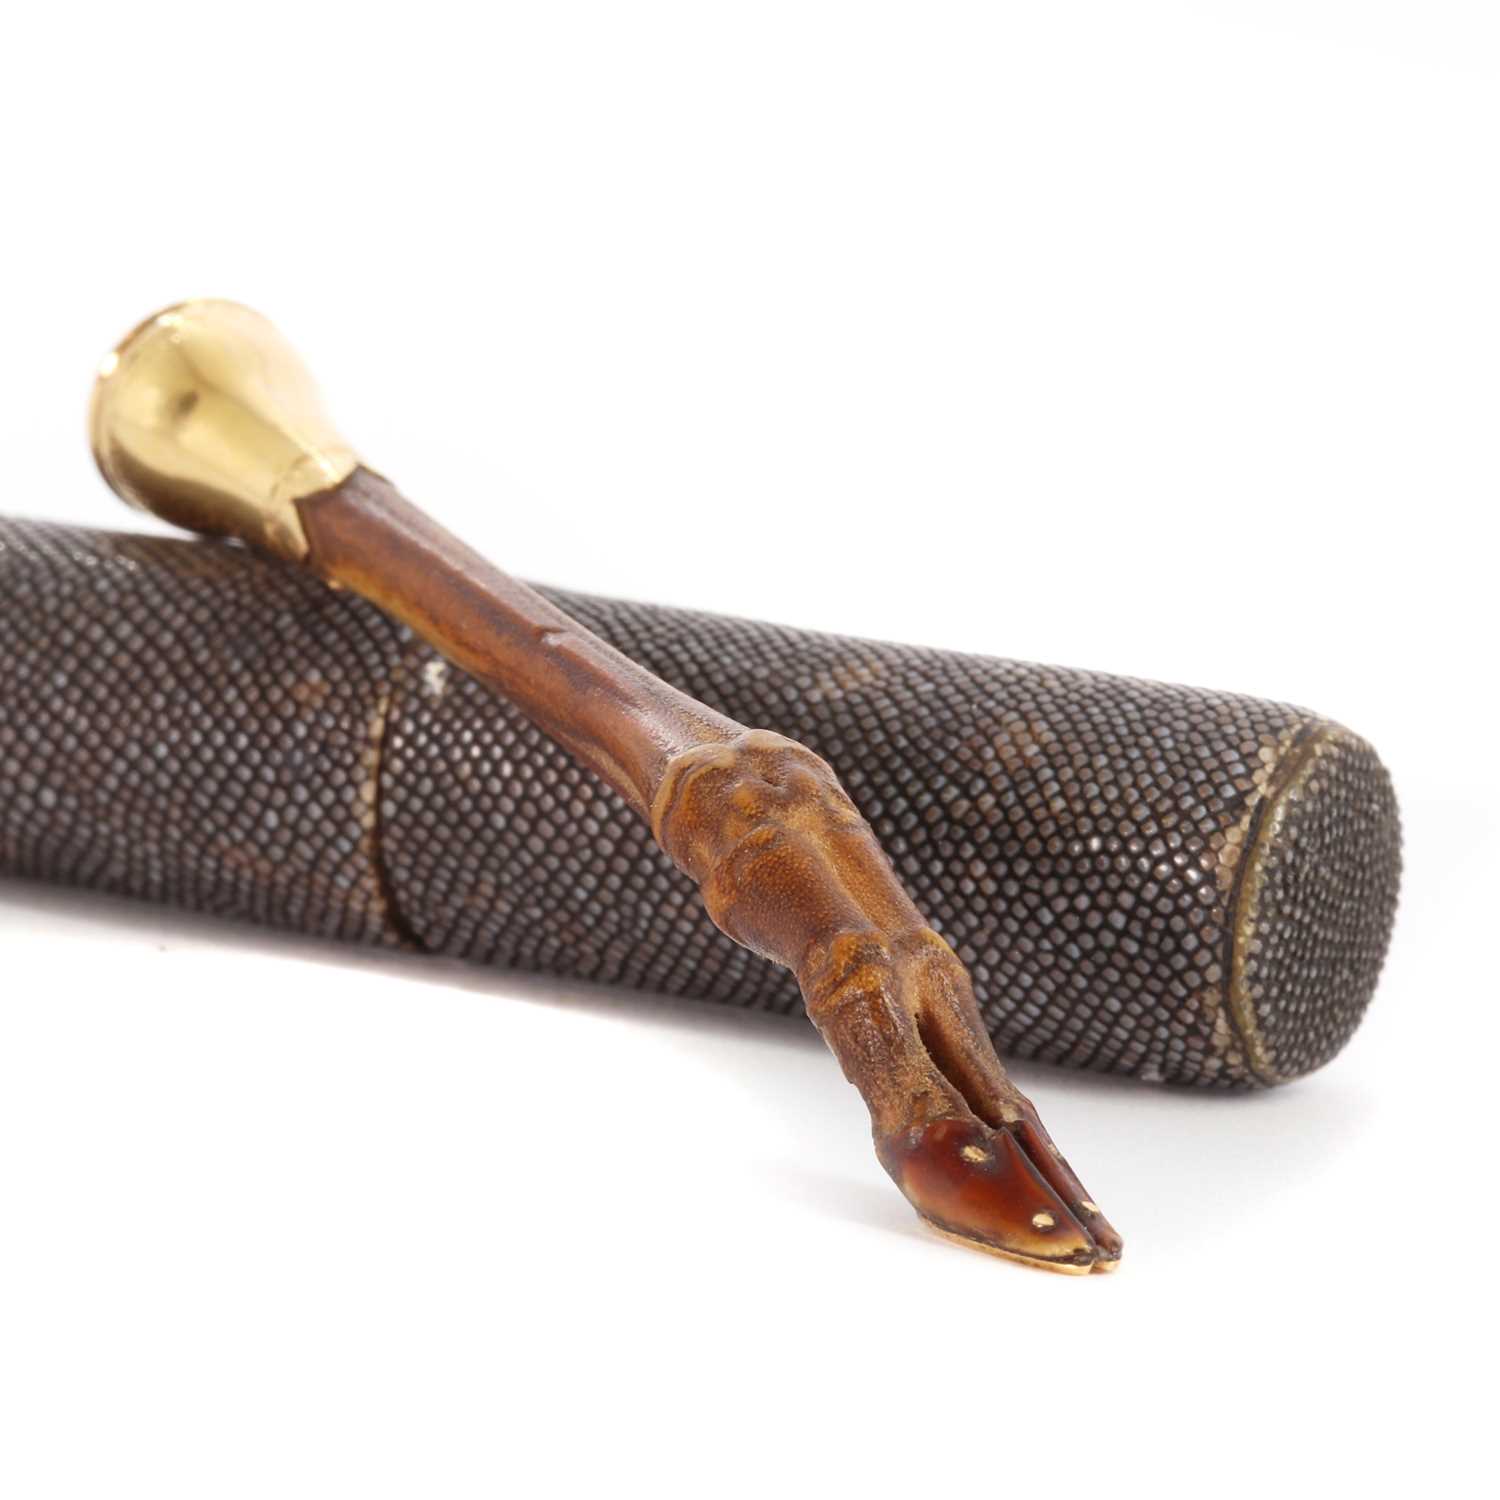 Lot 19 - A gold-mounted pipe tamper